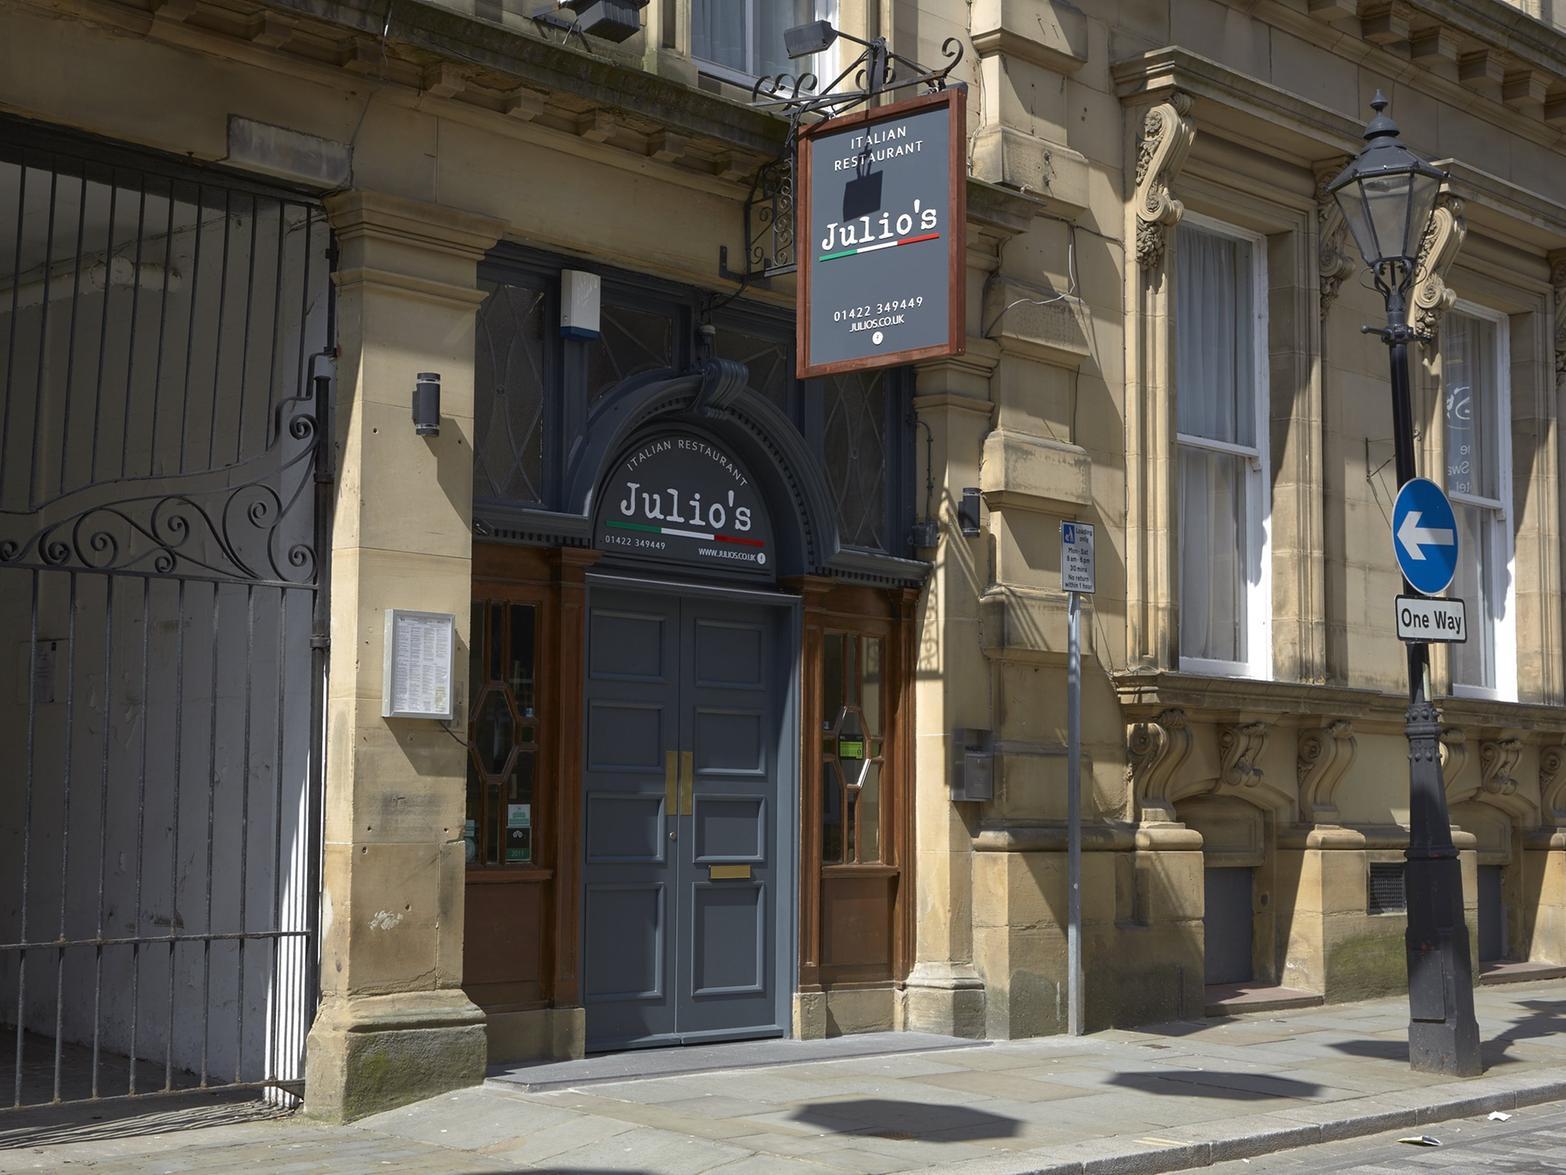 This Halifax restaurant sits in the heart of the town centre and offers a variety of classic Italian dishes with vegetarian and vegan options.